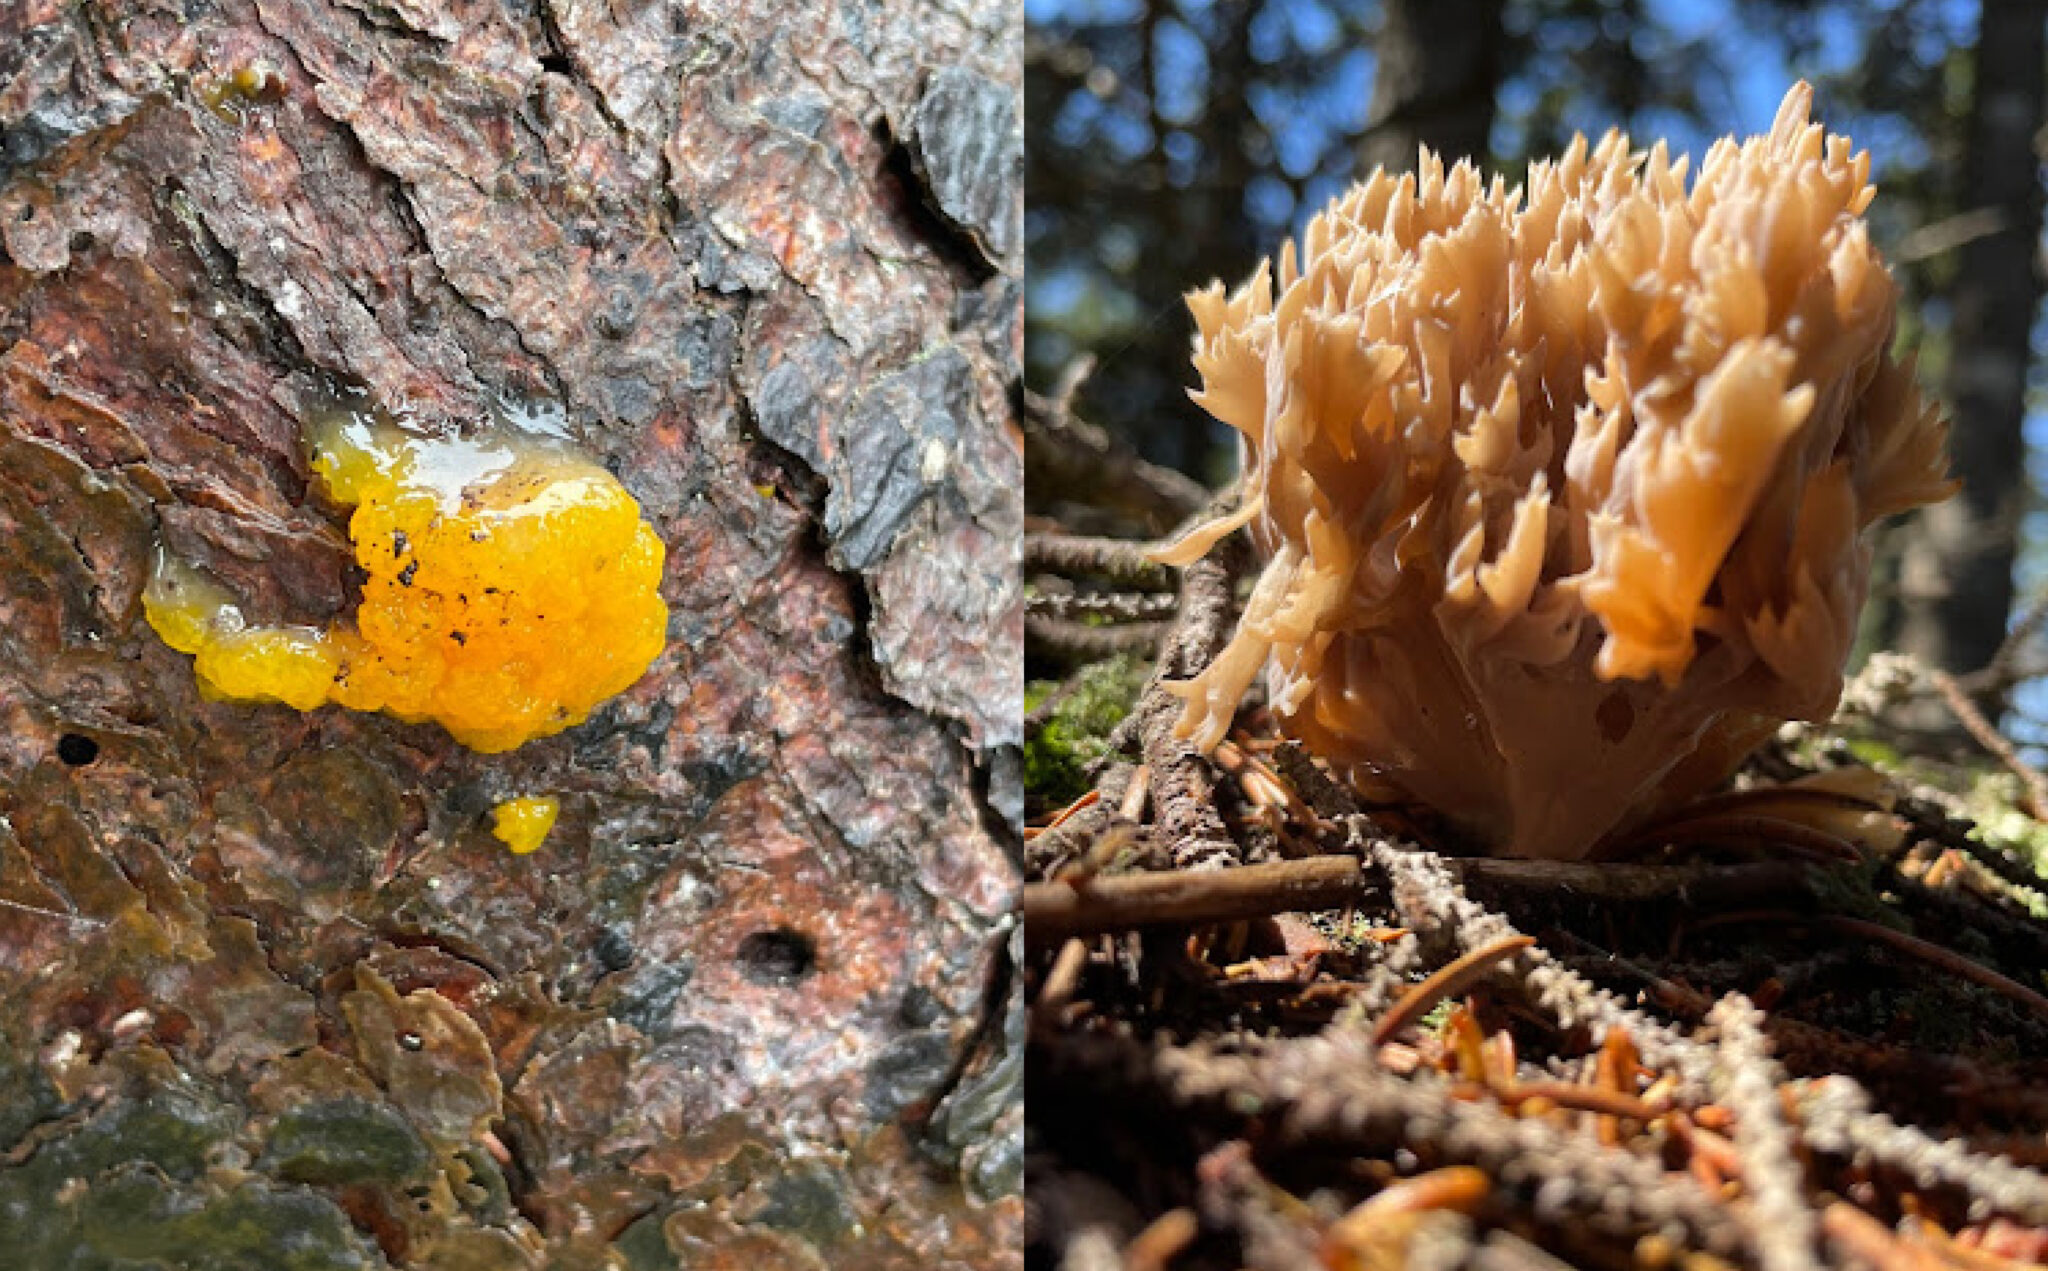 Witch's butter close-up view on the left, and on the right is a close-up view of a coral fungi.